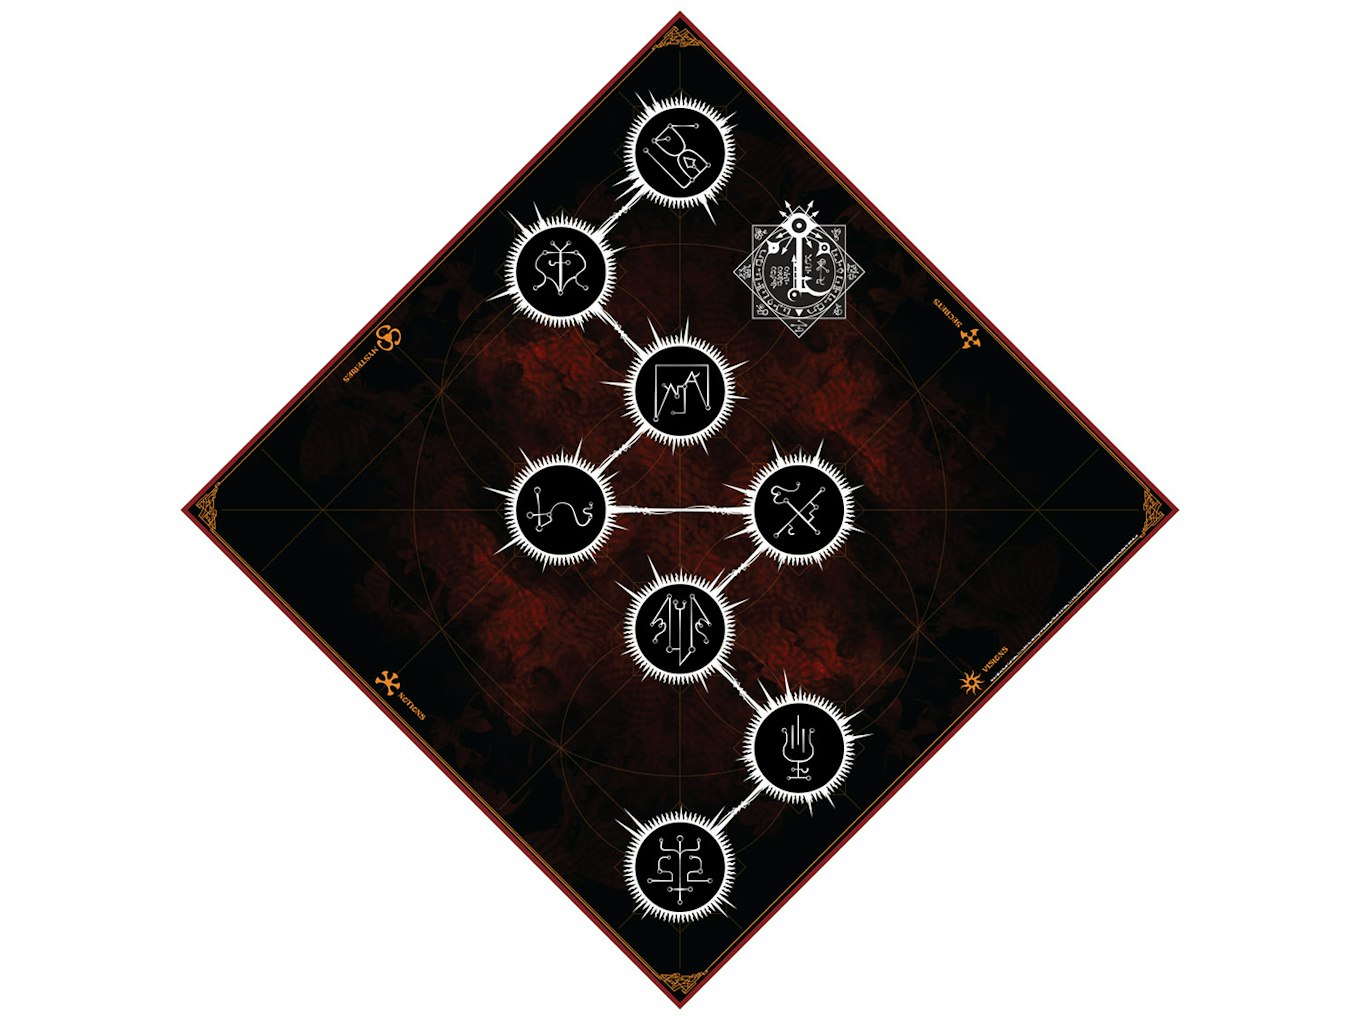 The Path of Suns game board.